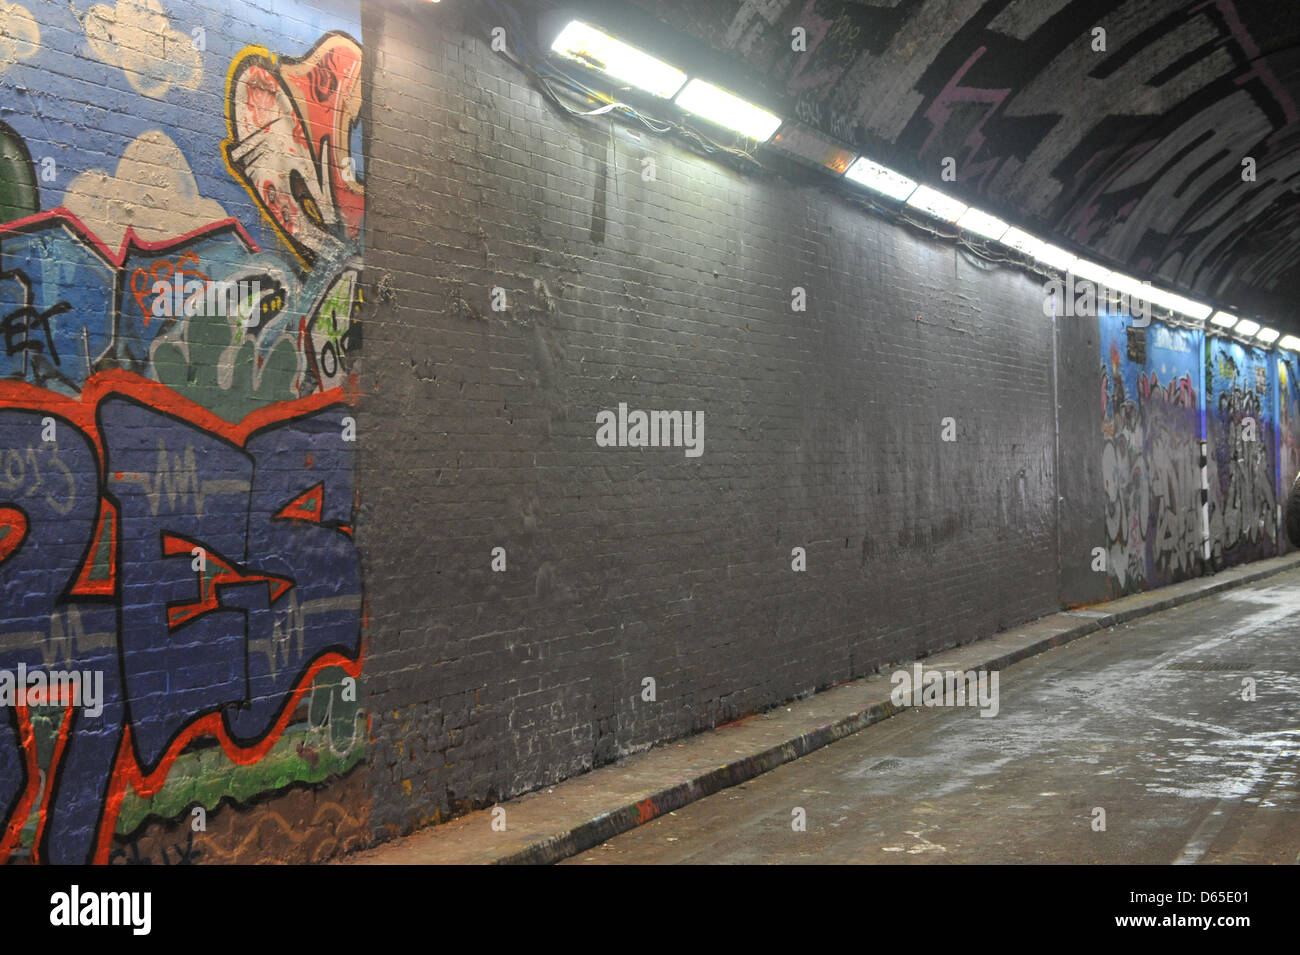 Leake Street, London, UK. 12th April 2013. The 'Burn in Hell Maggie' graffiti has been painted over by British Rail as it was deemed to cause offence, which is against their guidelines for the graffiti on Leake Street. Credit: Matthew Chattle / Alamy Live News Stock Photo